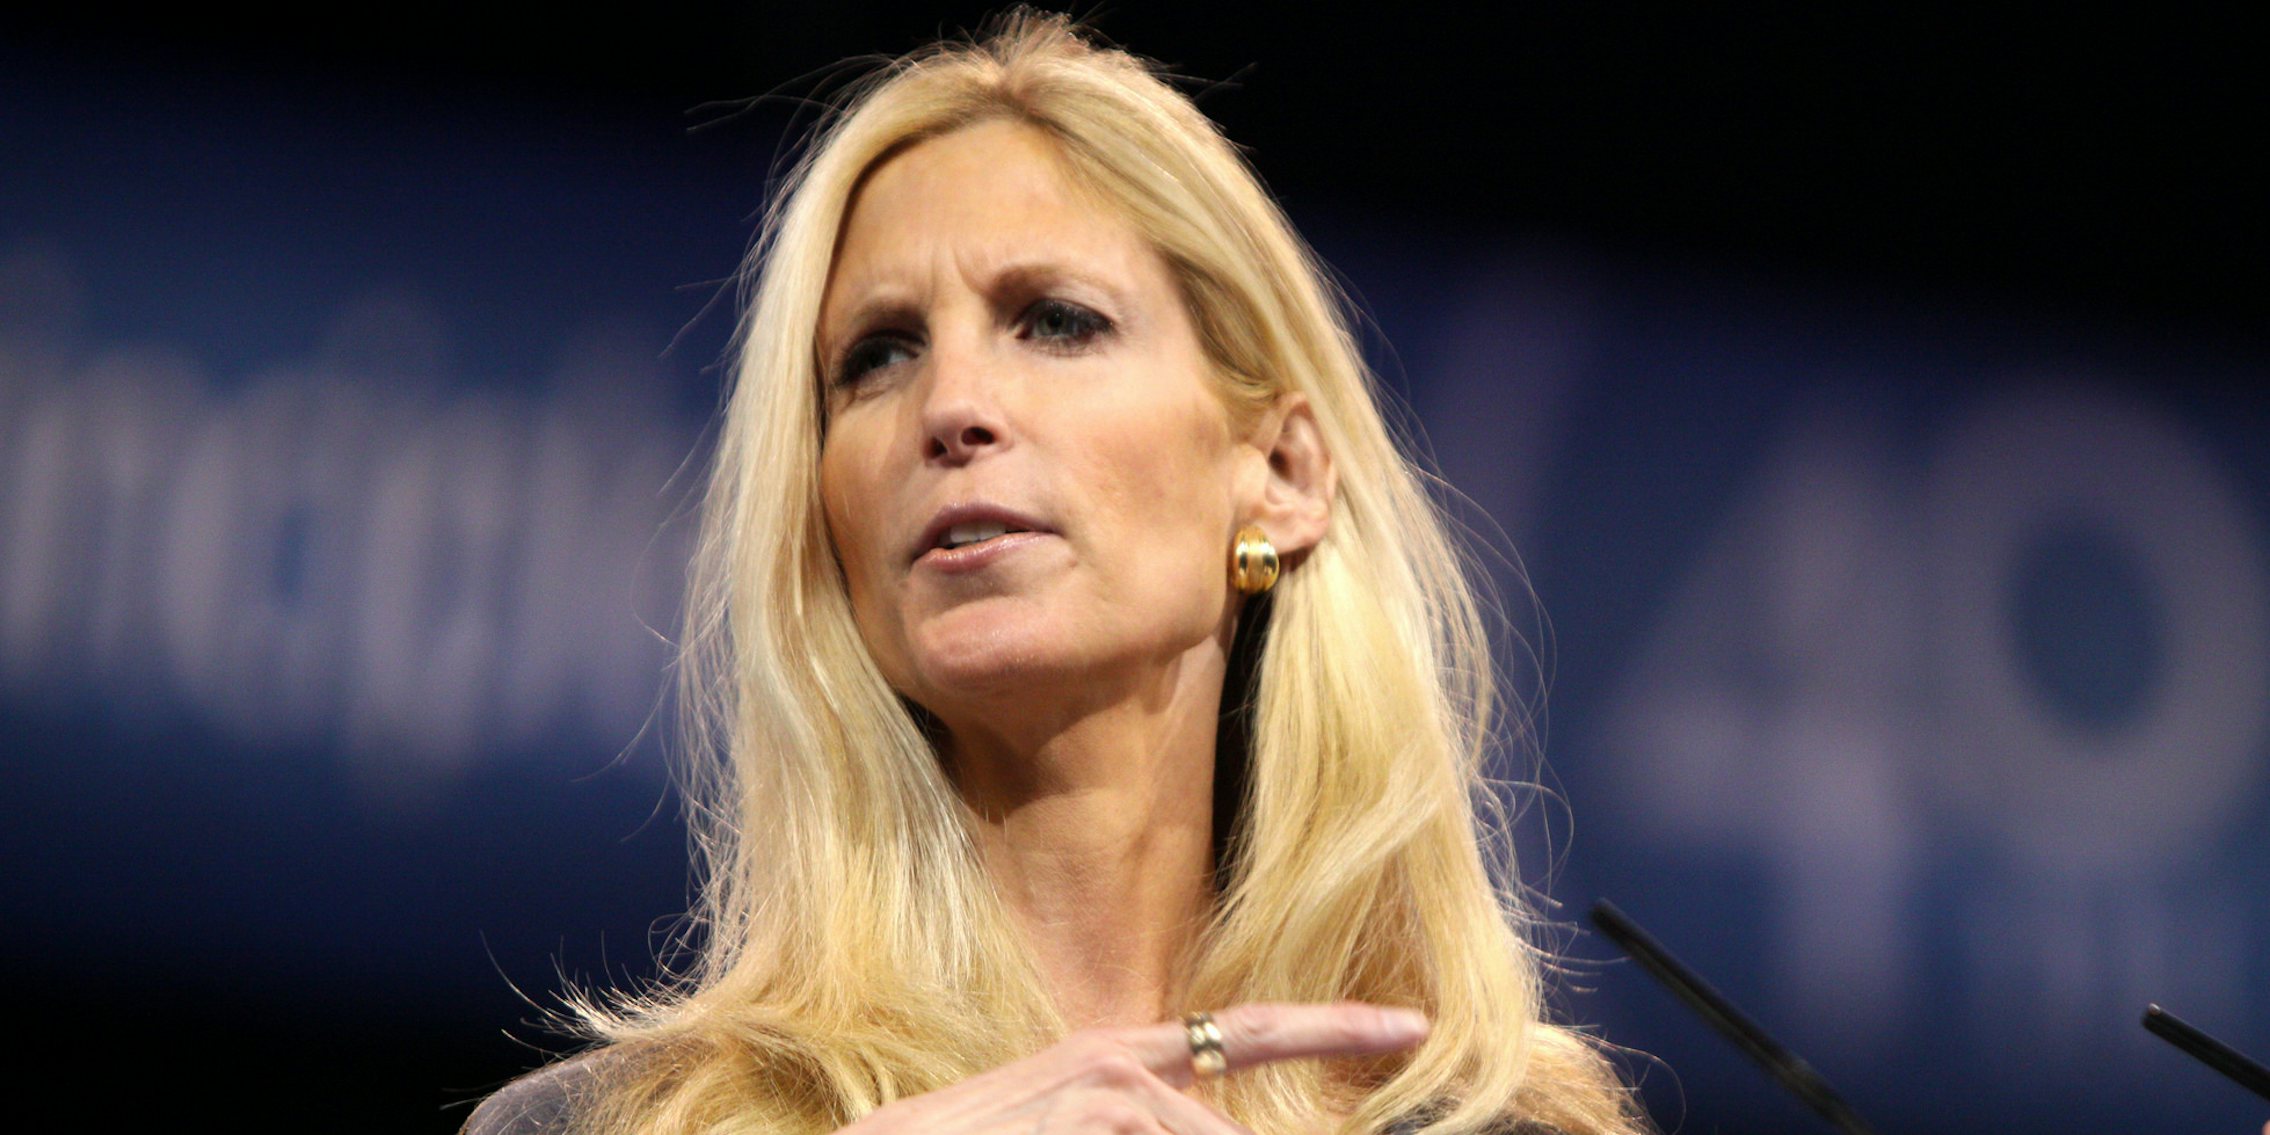 Ann Coulter claimed there were 'child actors' at detention centers where children were separated from their families at the border.